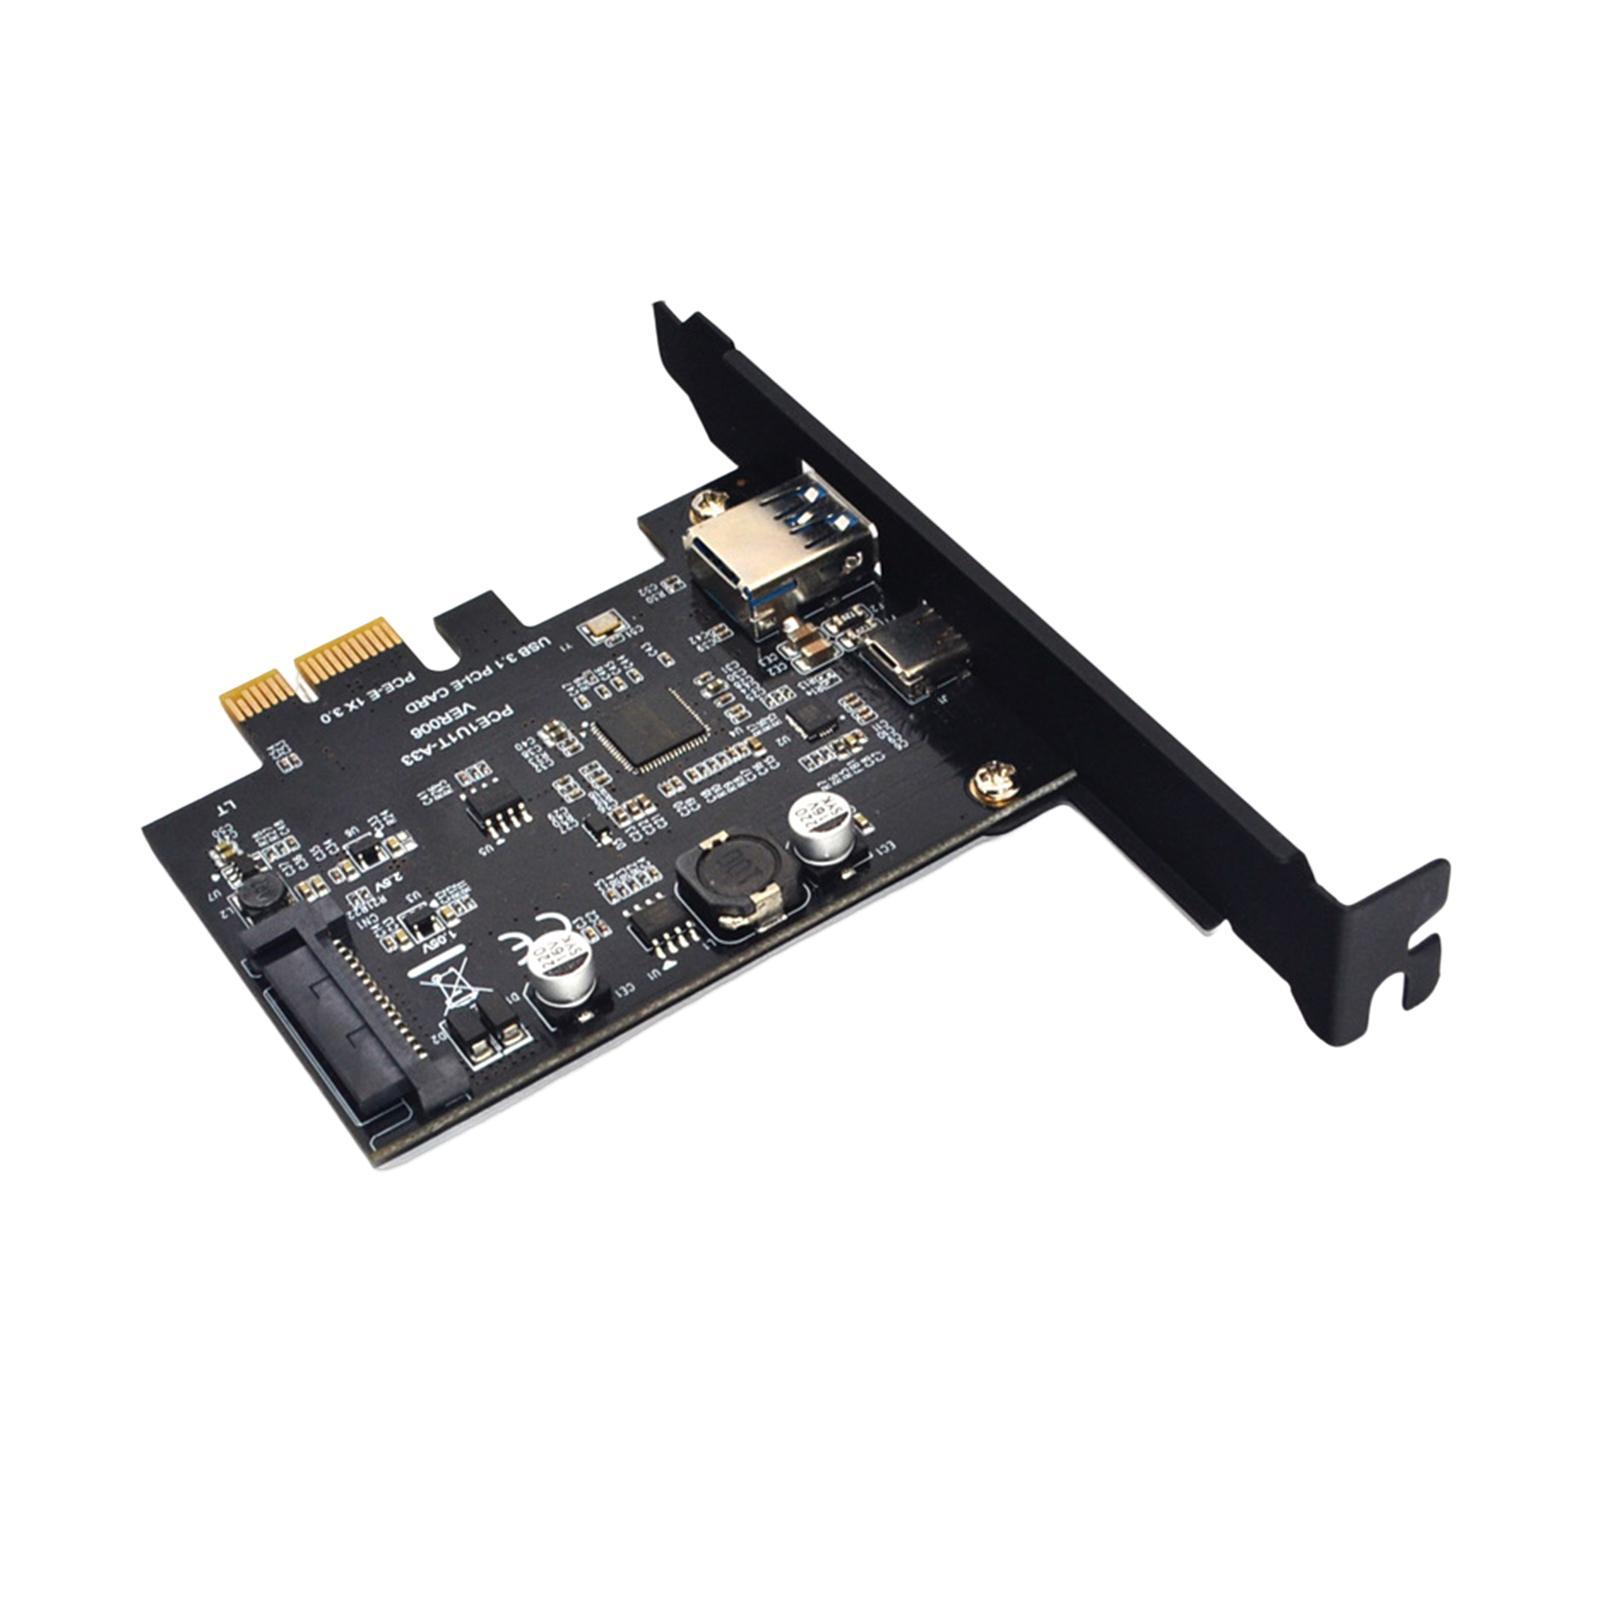 Pci-e to USB 3.1  10 Gbps USB A + USB C Expansion Card Components Easy to Install High Performance  Adapter Card for Computer